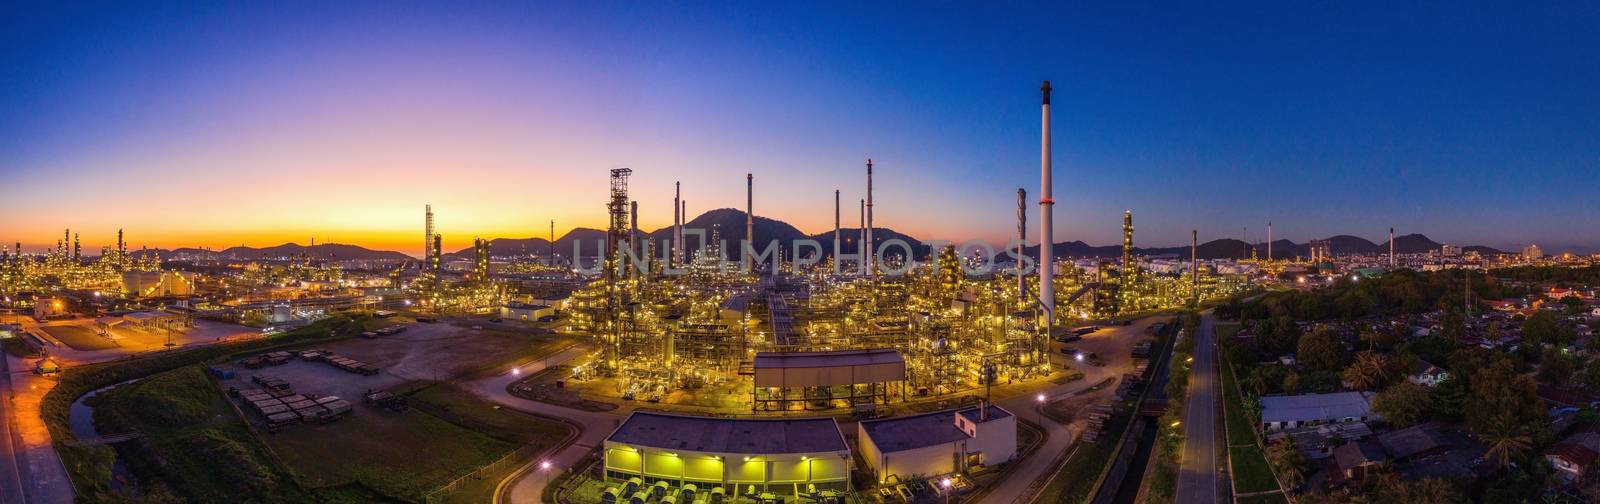 Aerial view of Oil refinery, Panorama of Oil Industry.